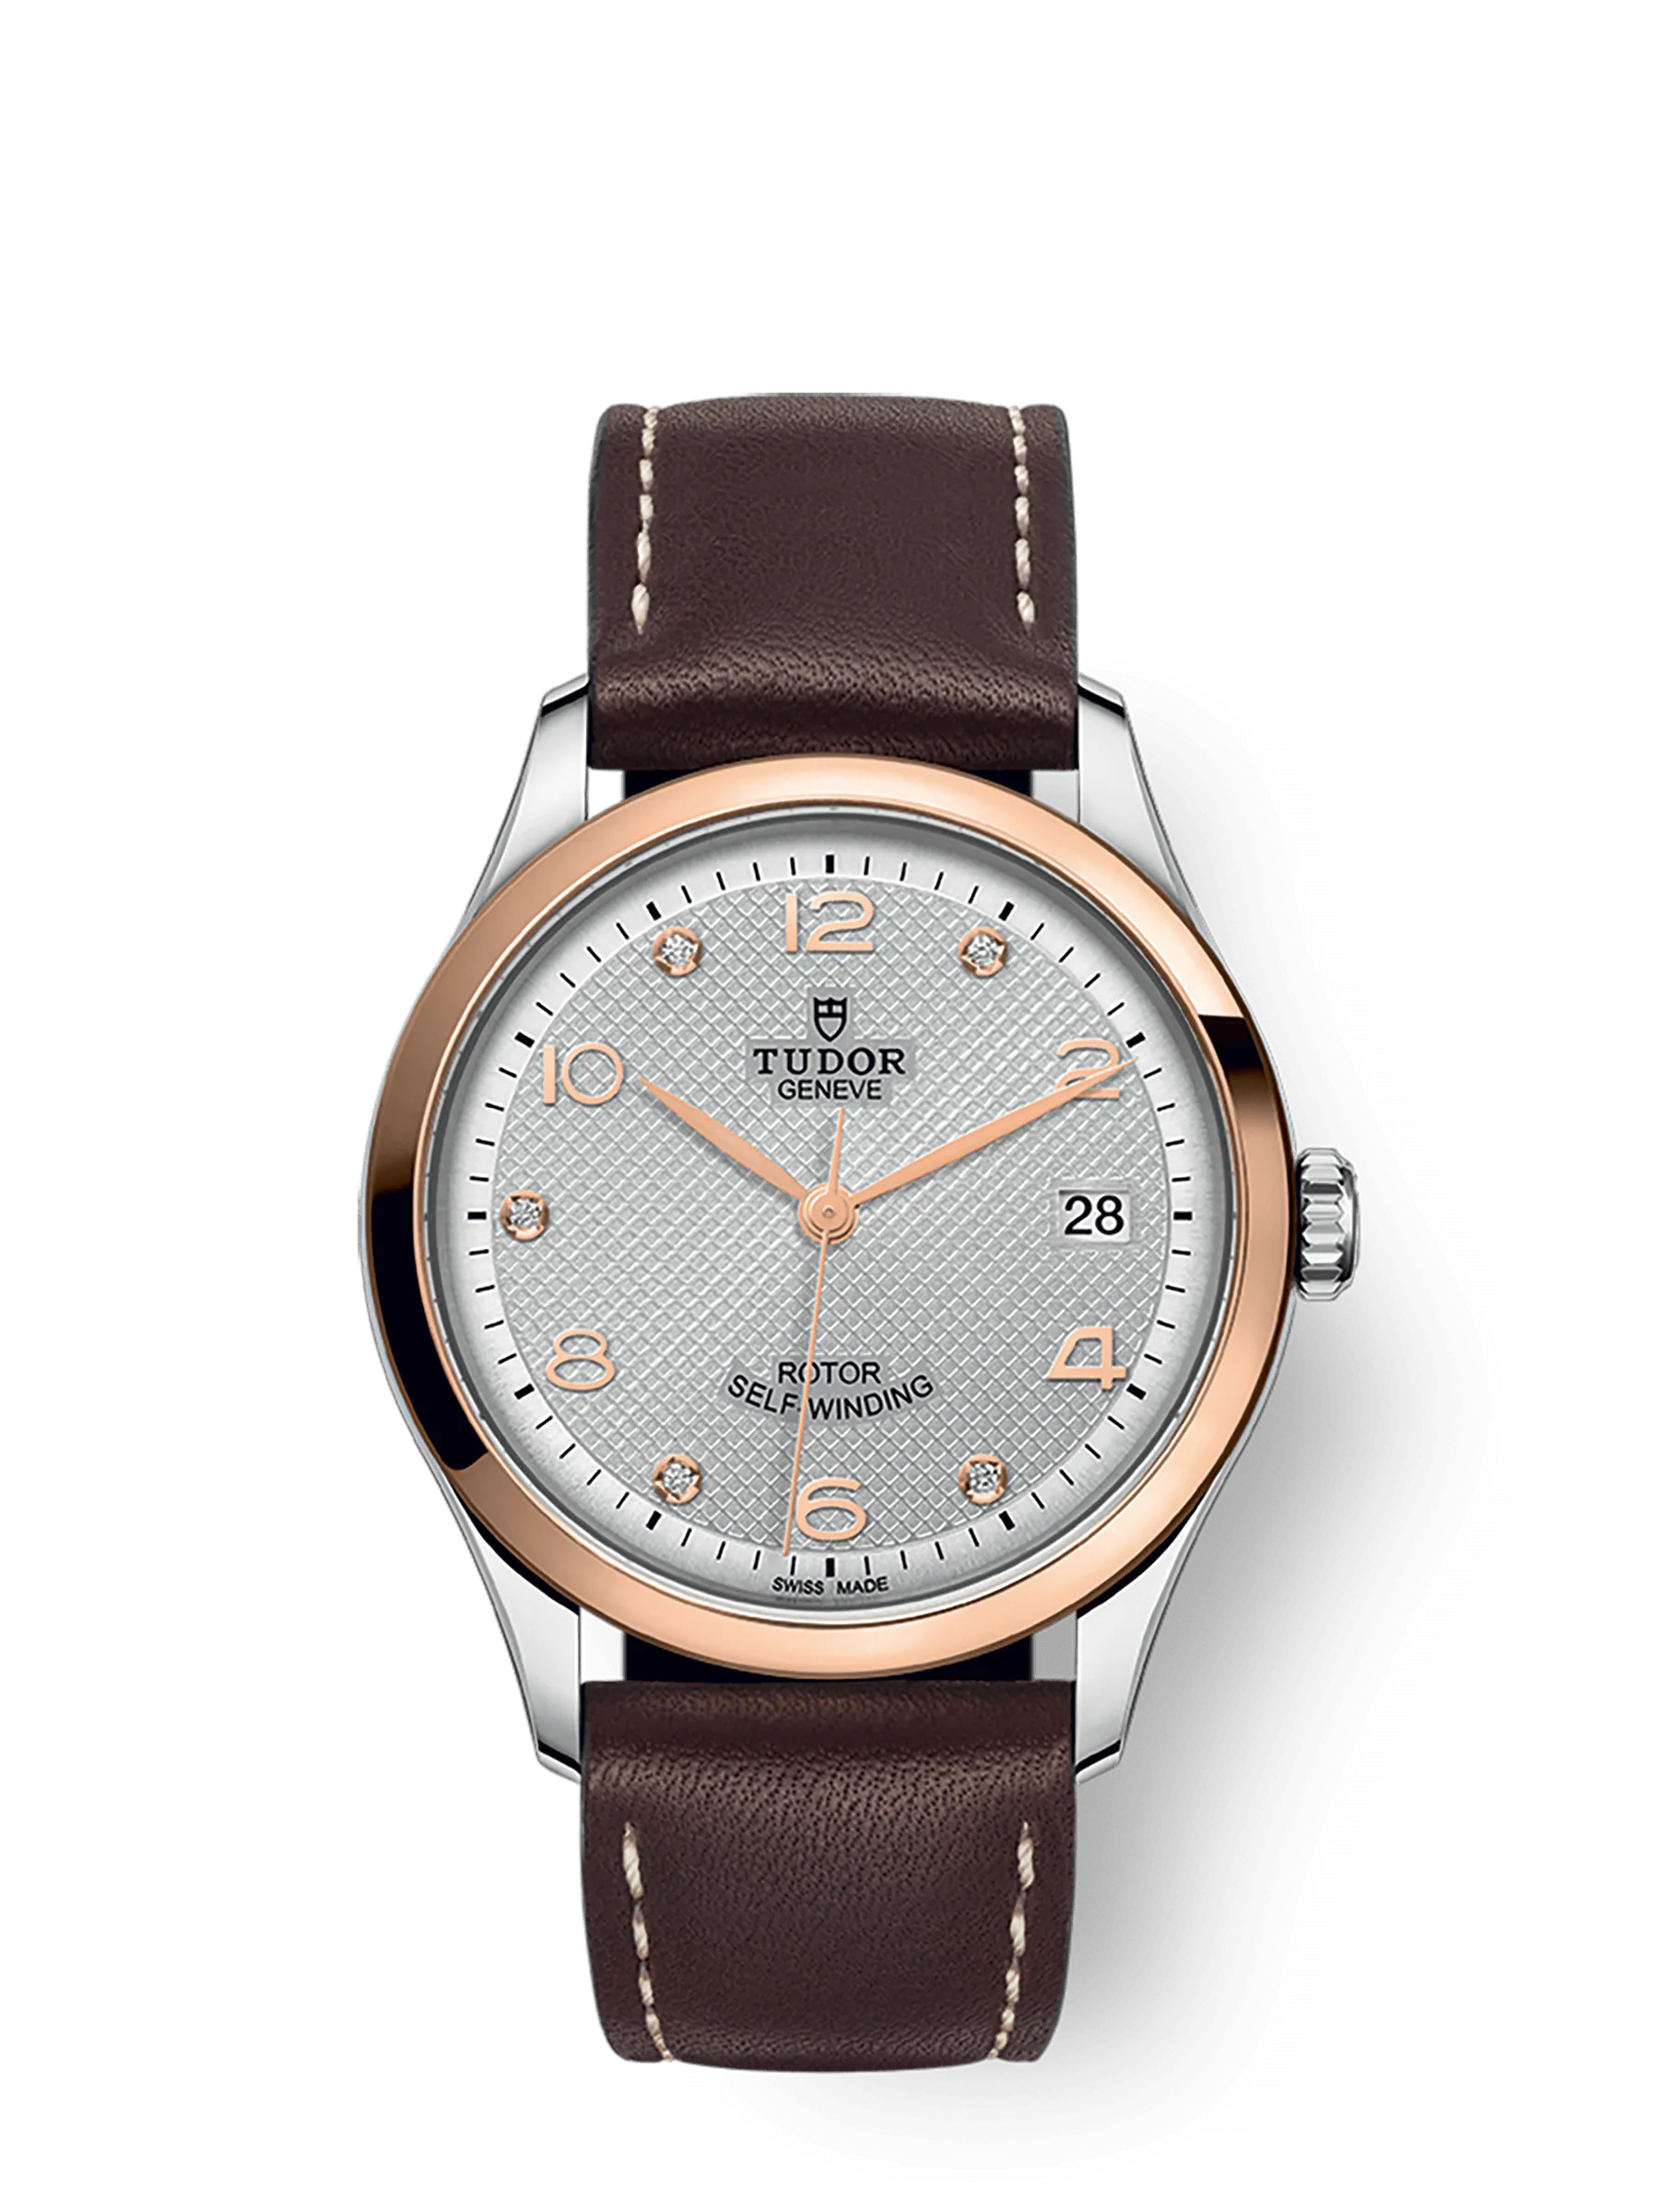 Tudor 1926, Stainless Steel and 18k Rose Gold with Diamond-set, 36mm, Ref# M91451-0006